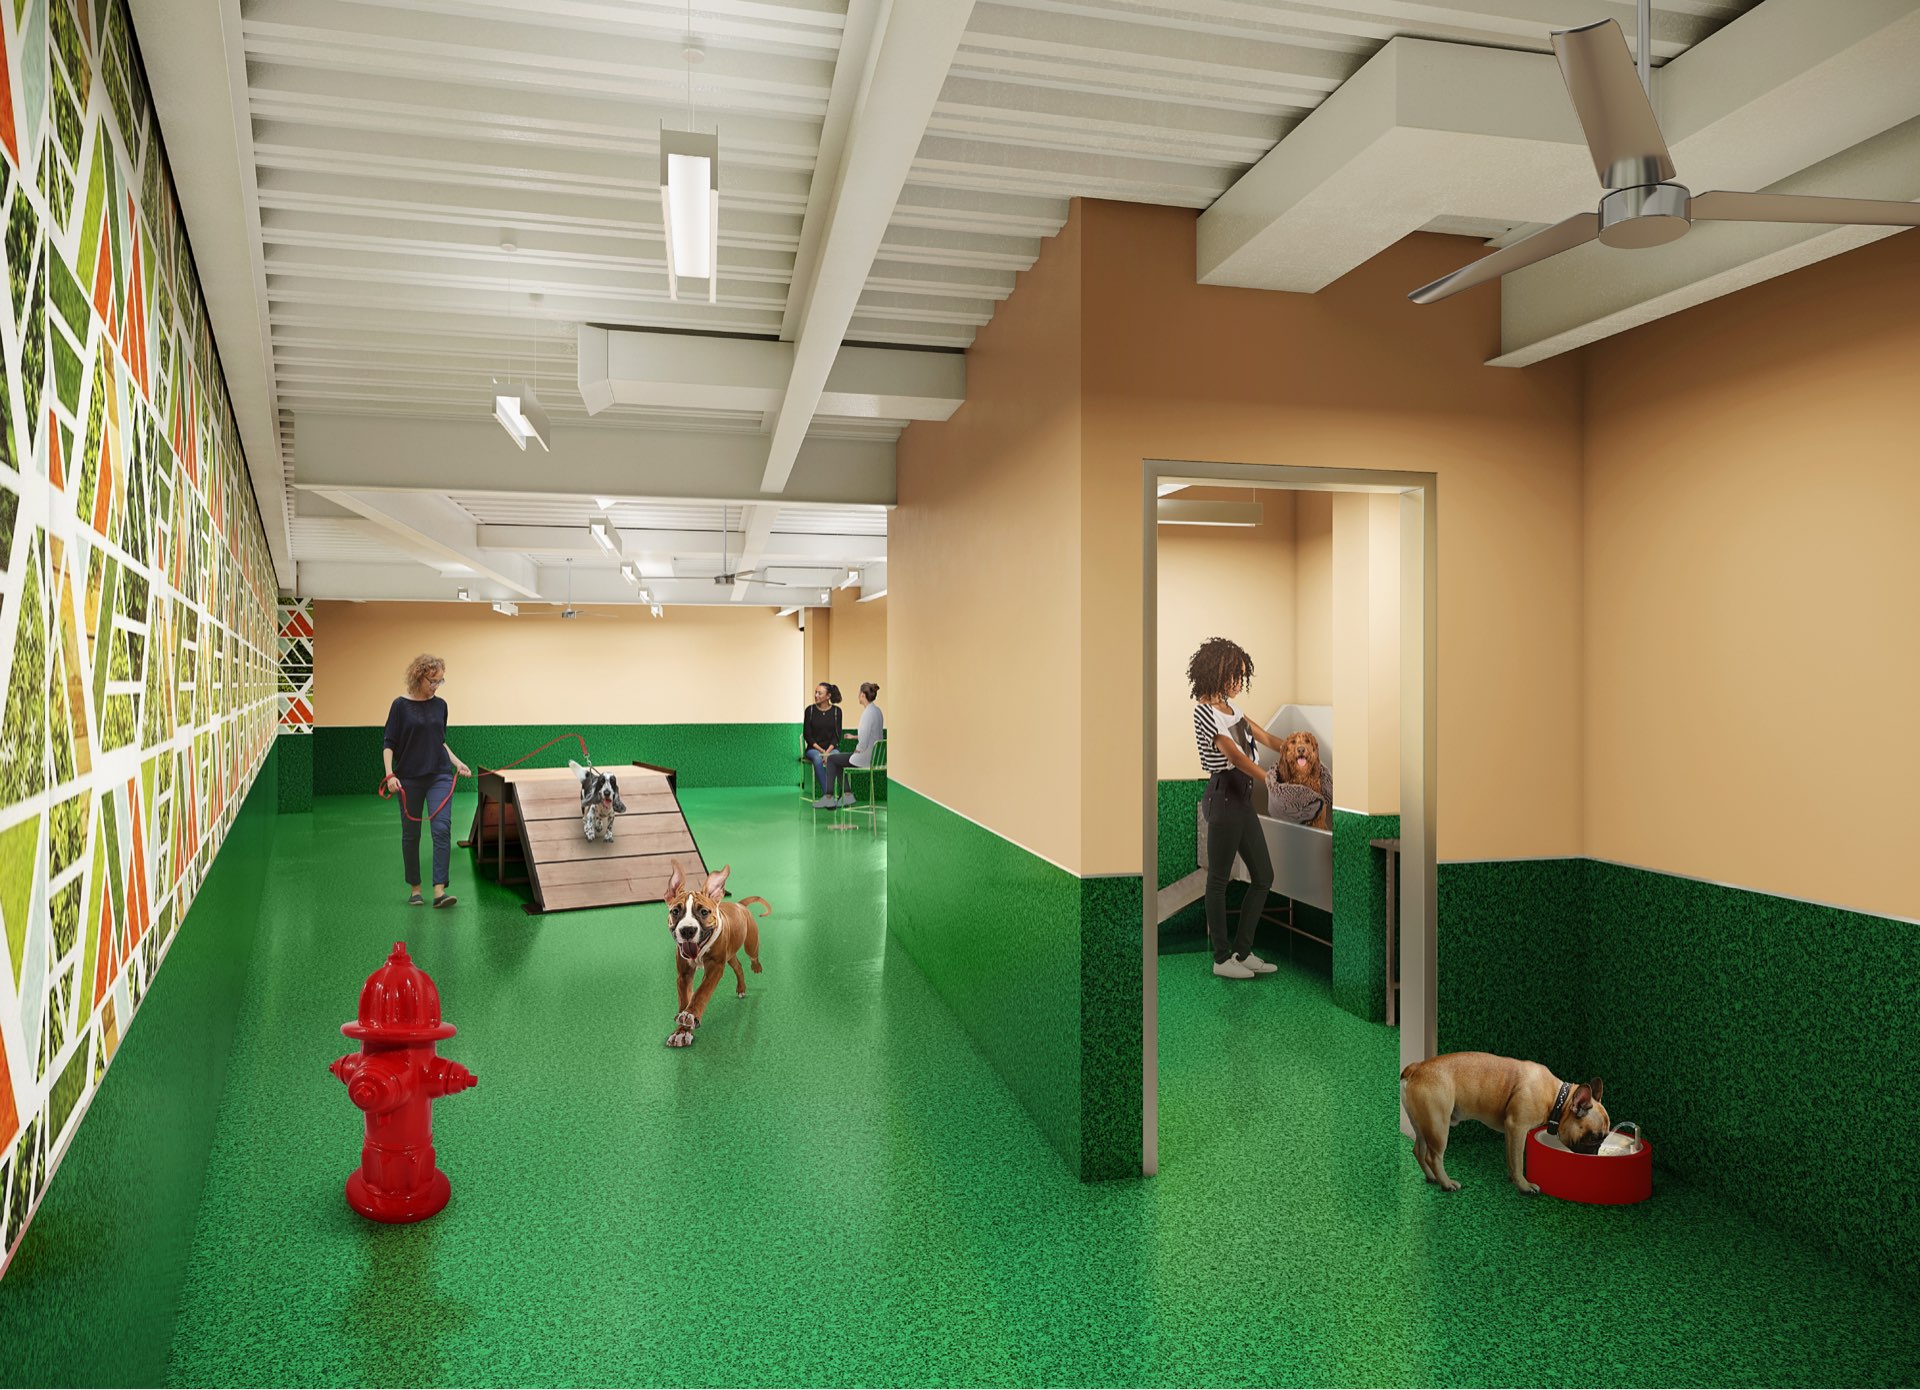 An indoor dog run provides convenience for residents and pets alike.